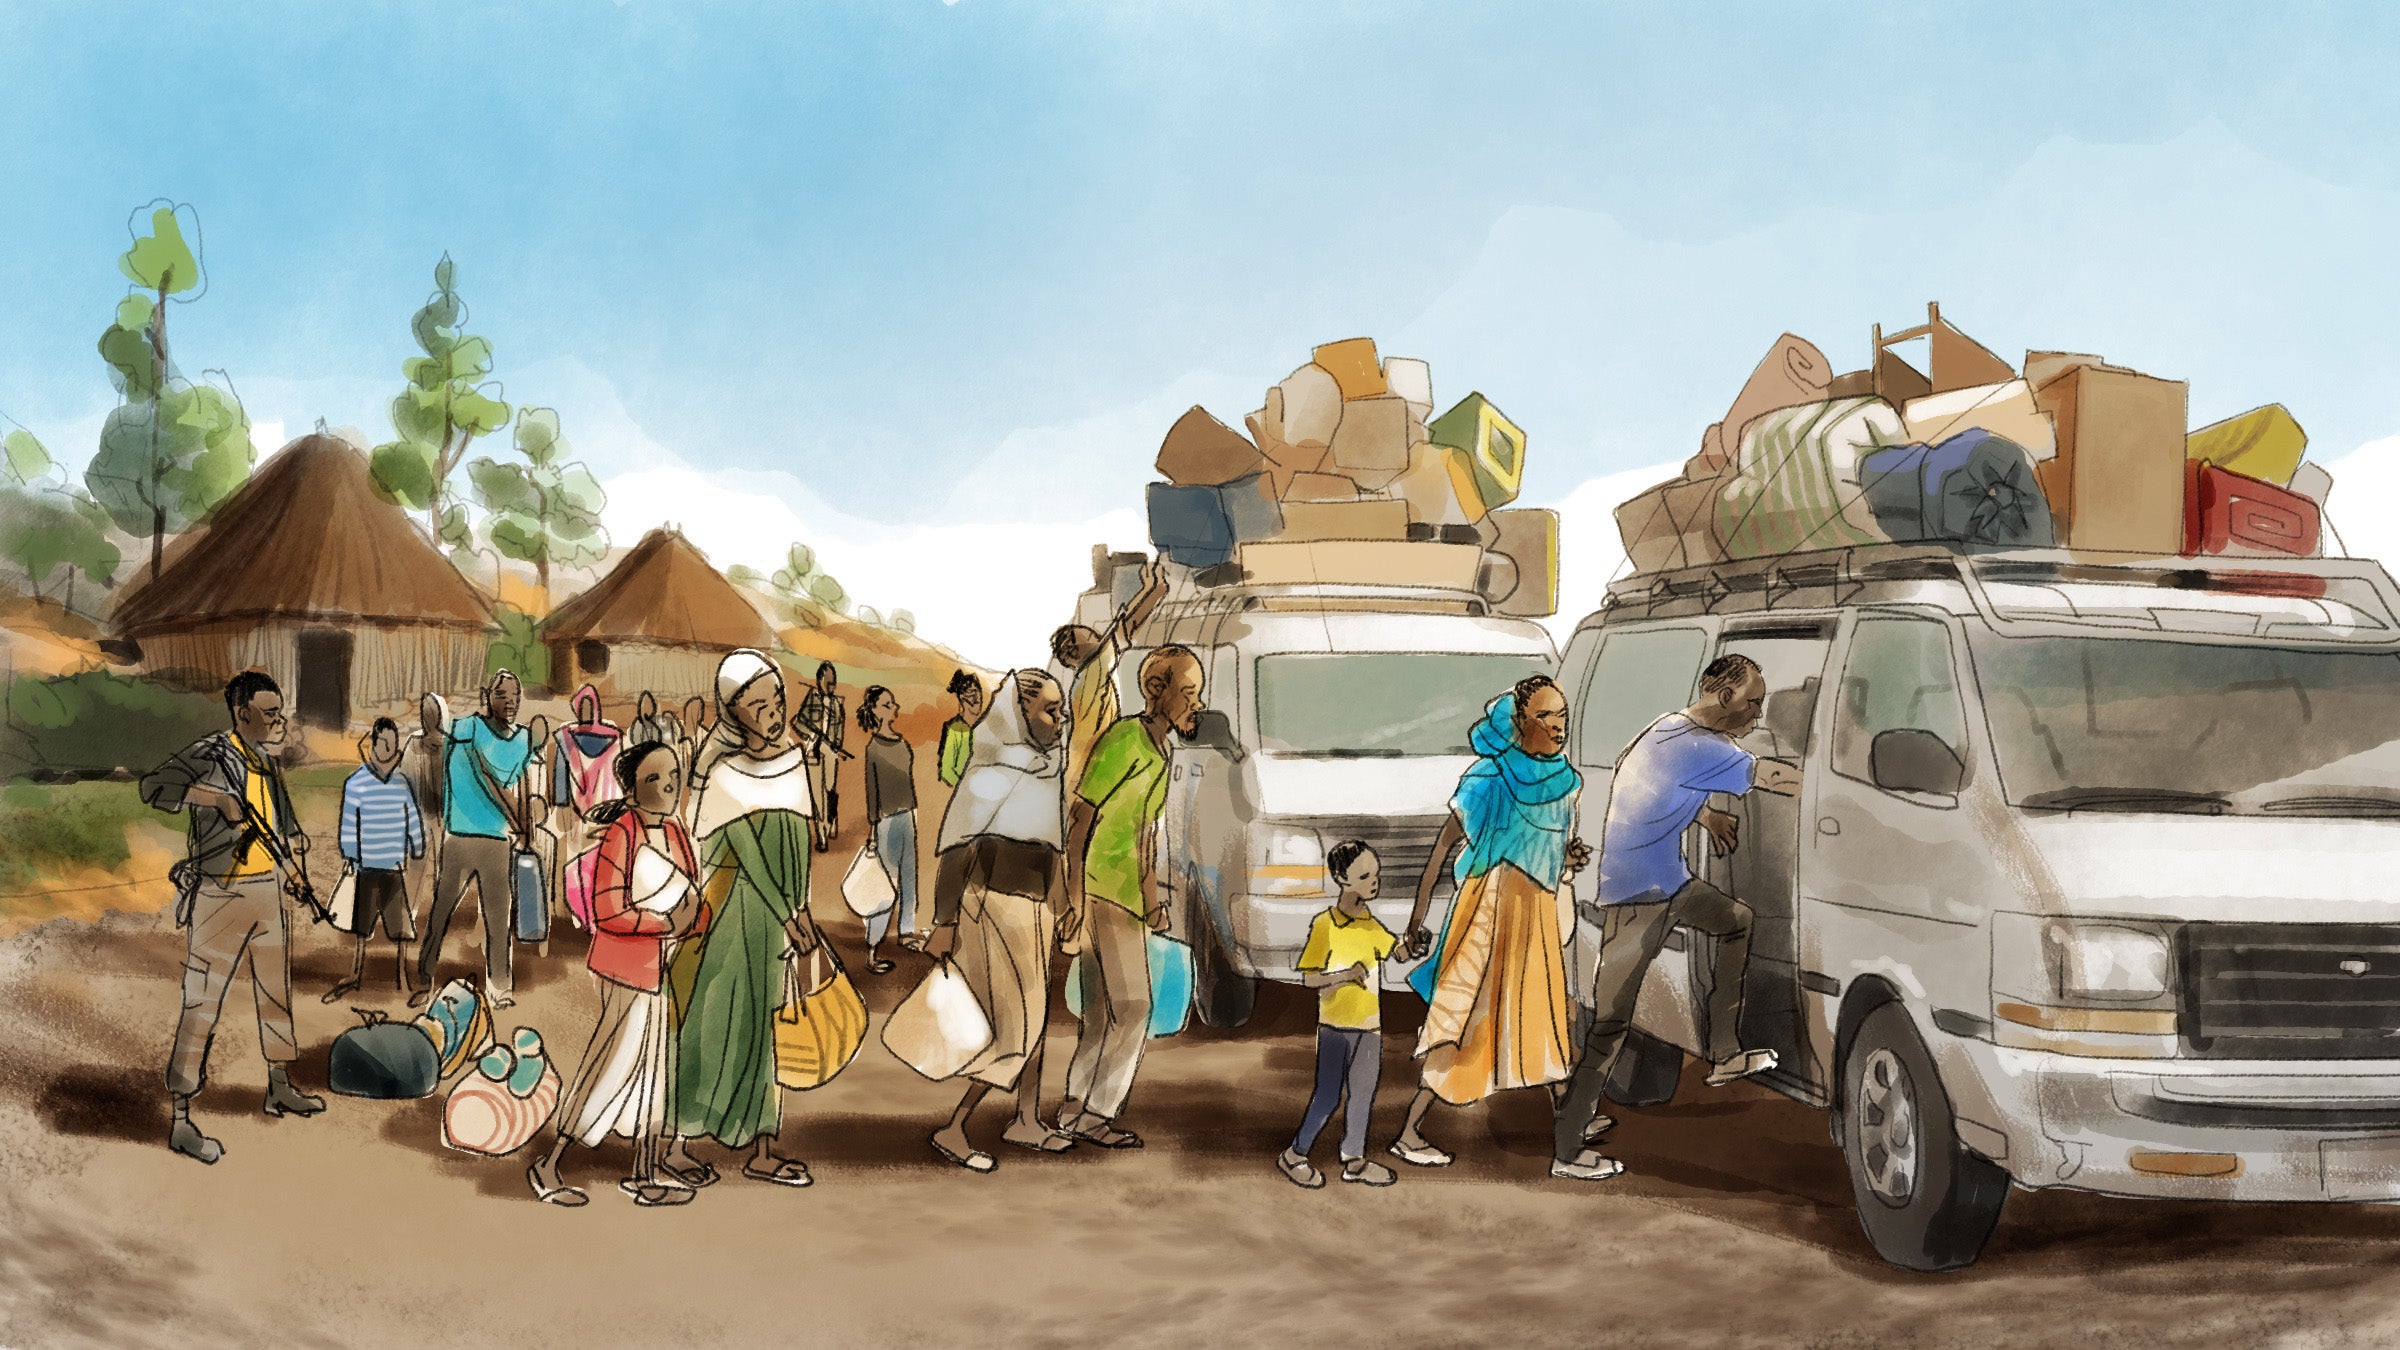 Illustration of people boarding buses with their belongings